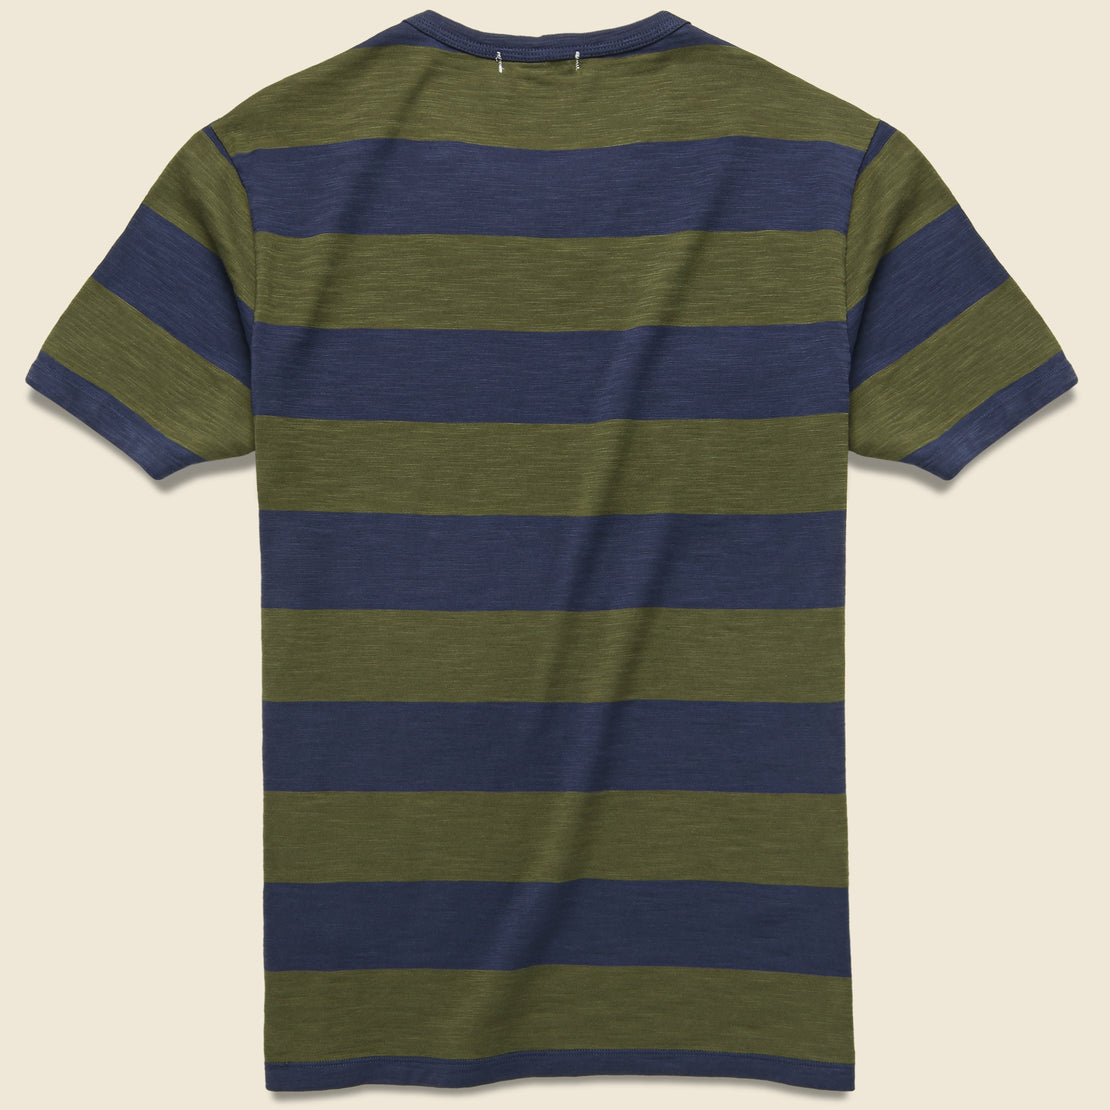 Wide Striped Pocket Tee - Navy/Military Green - Alex Mill - STAG Provisions - Tops - S/S Tee